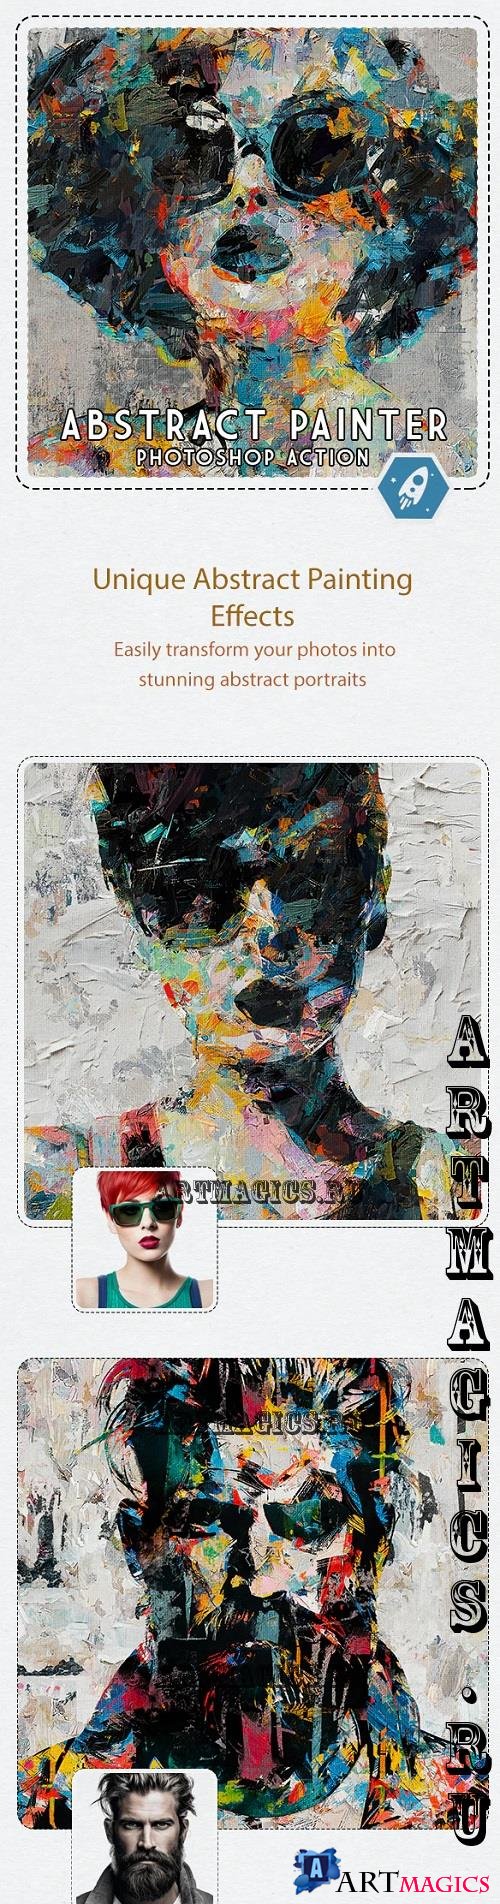 Abstract Painter Action - Turn Portraits Into Abstract Paintings - 48396631